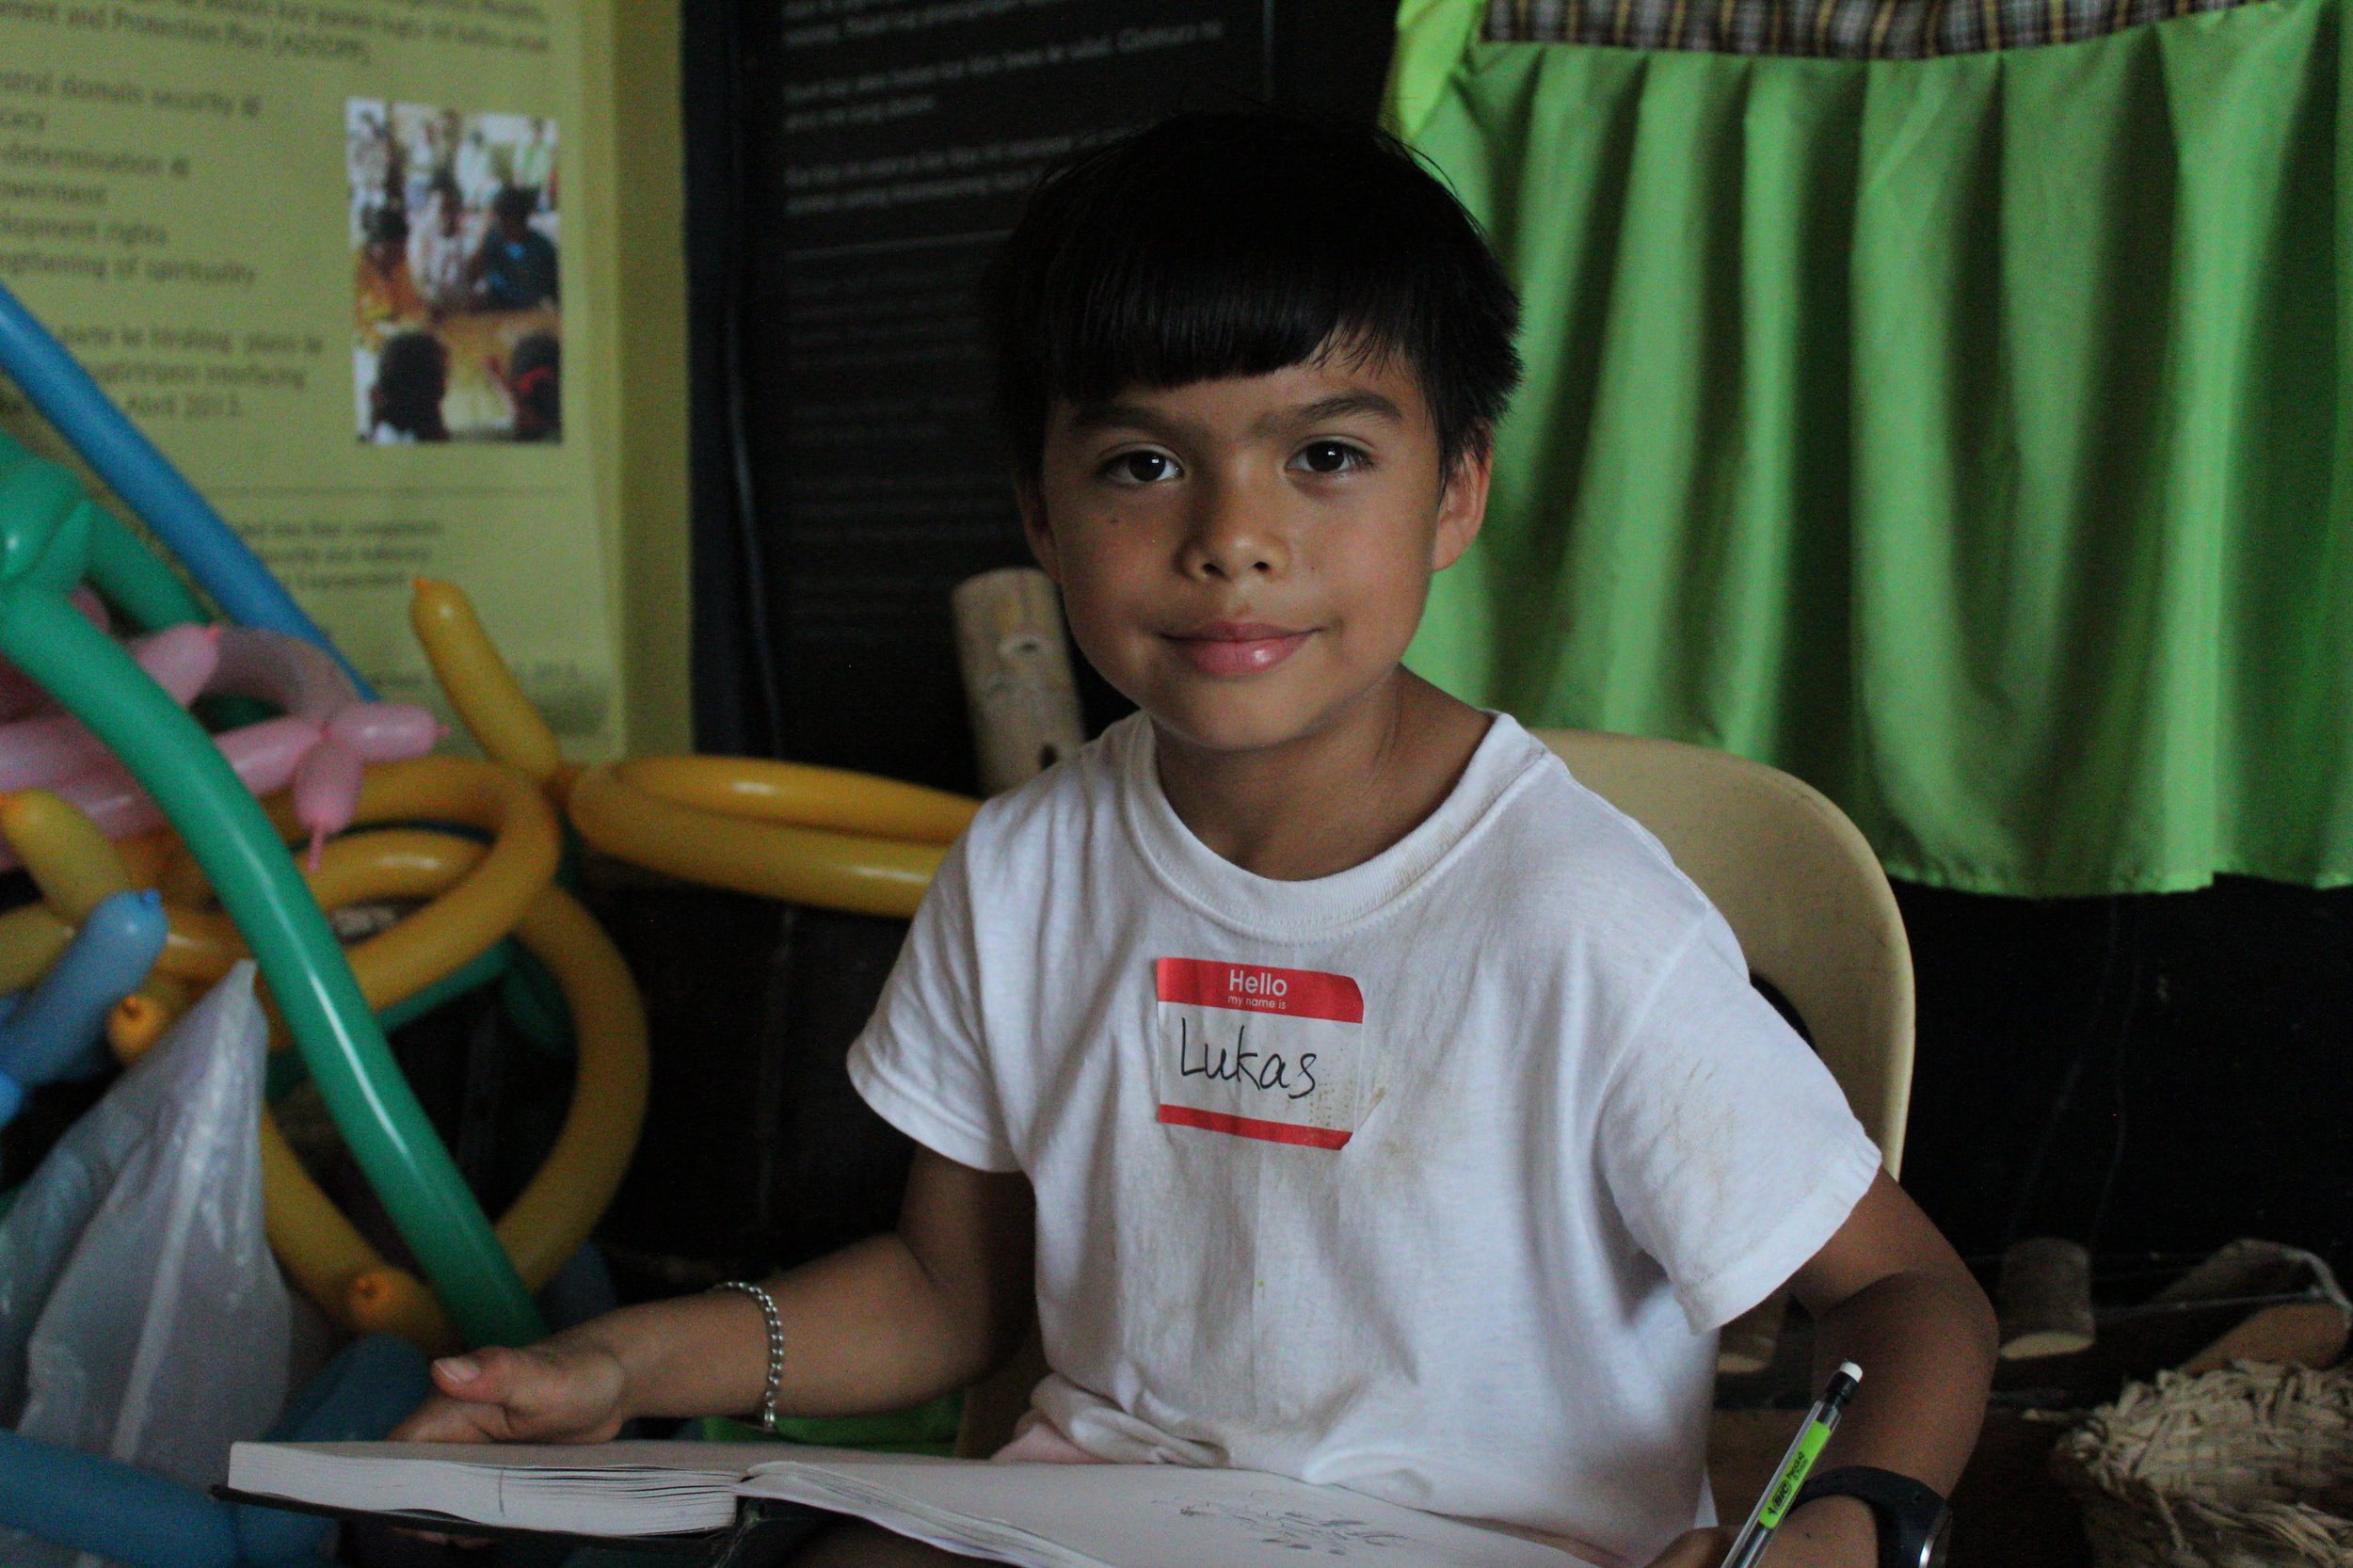  Lukas De Los Santos, the youngest member of our family, emptied his piggy bank to contribute to funding The Kamay Project 